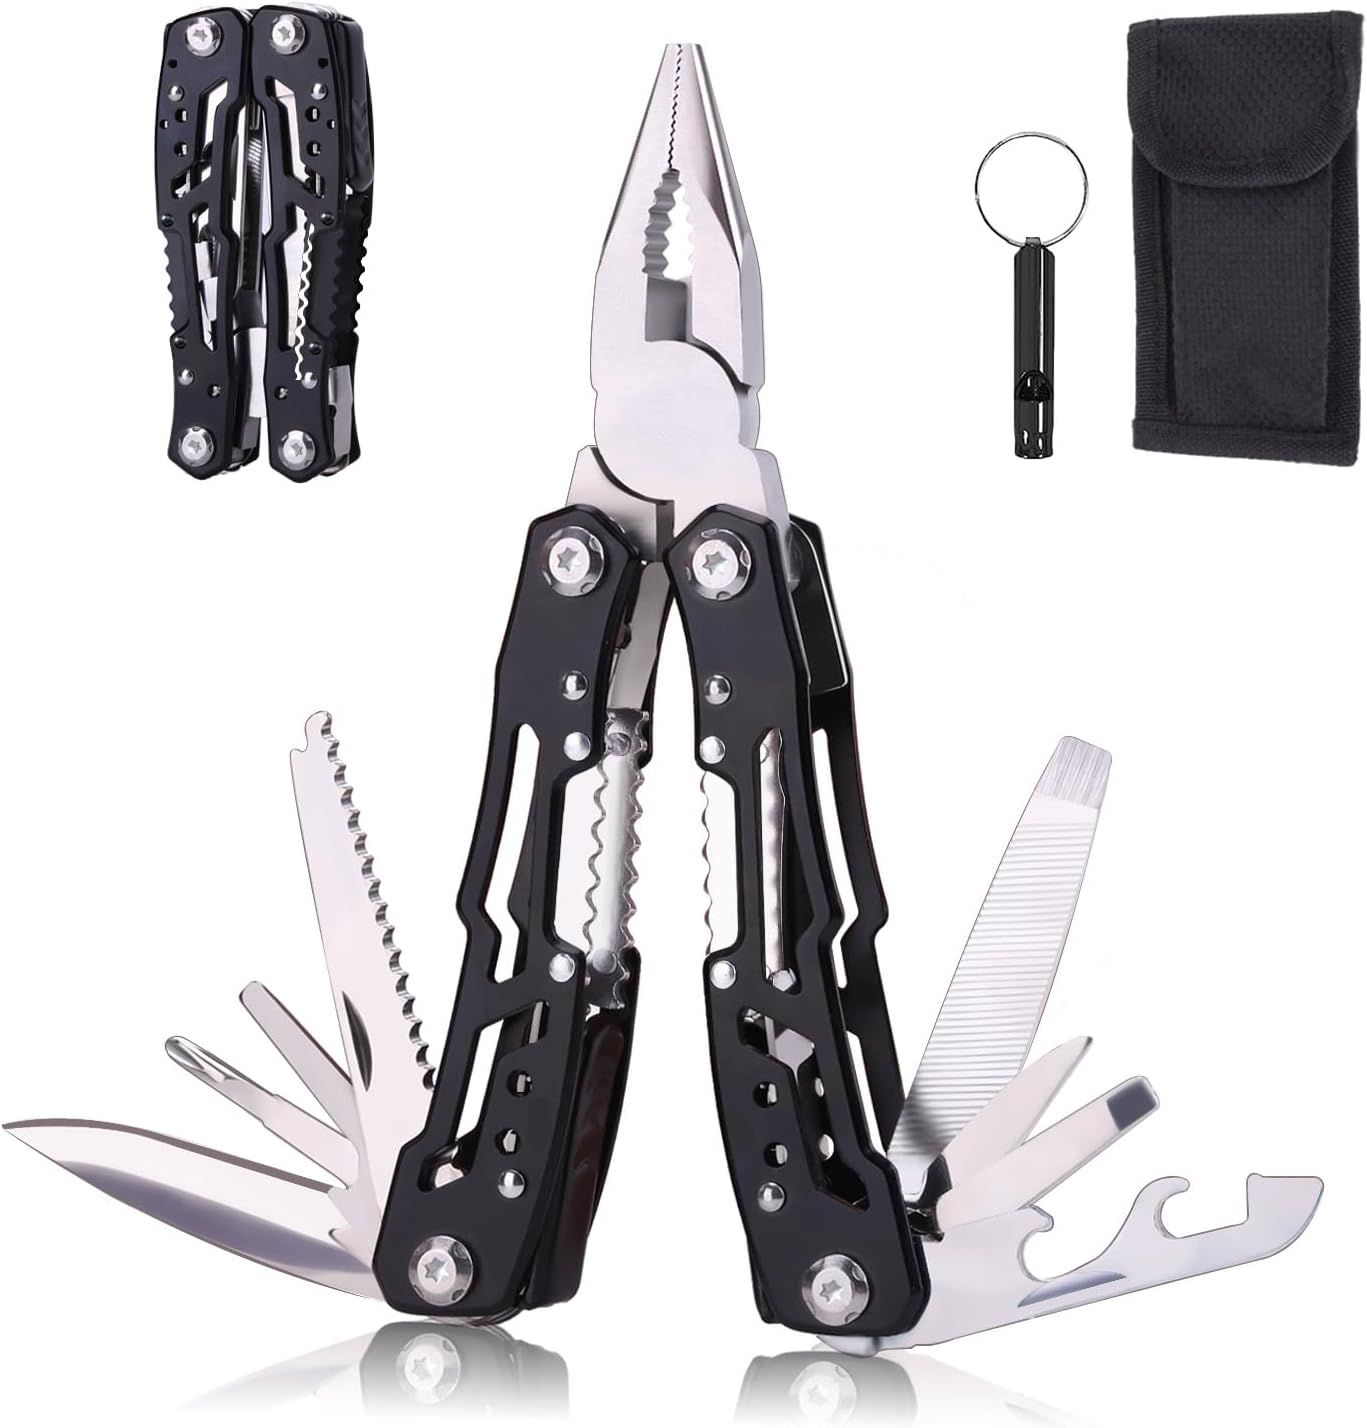 14 in 1 Multitool Pliers Gives One Whistle as a Gift, Professional Pocket Pliers from Wife Daught... | Amazon (US)